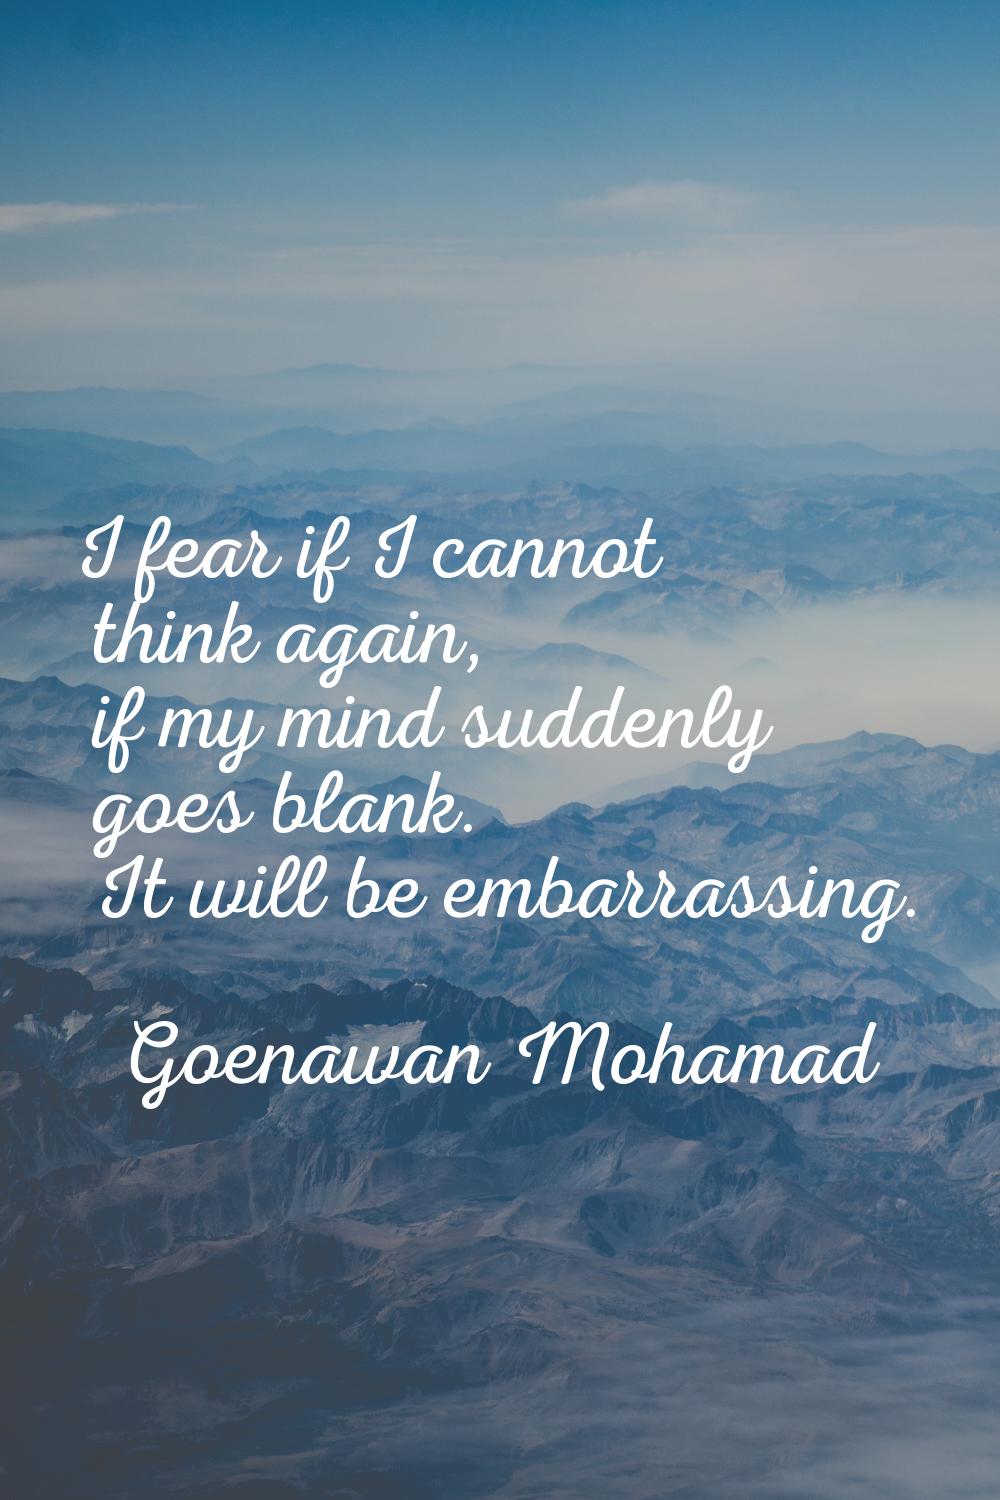 I fear if I cannot think again, if my mind suddenly goes blank. It will be embarrassing.